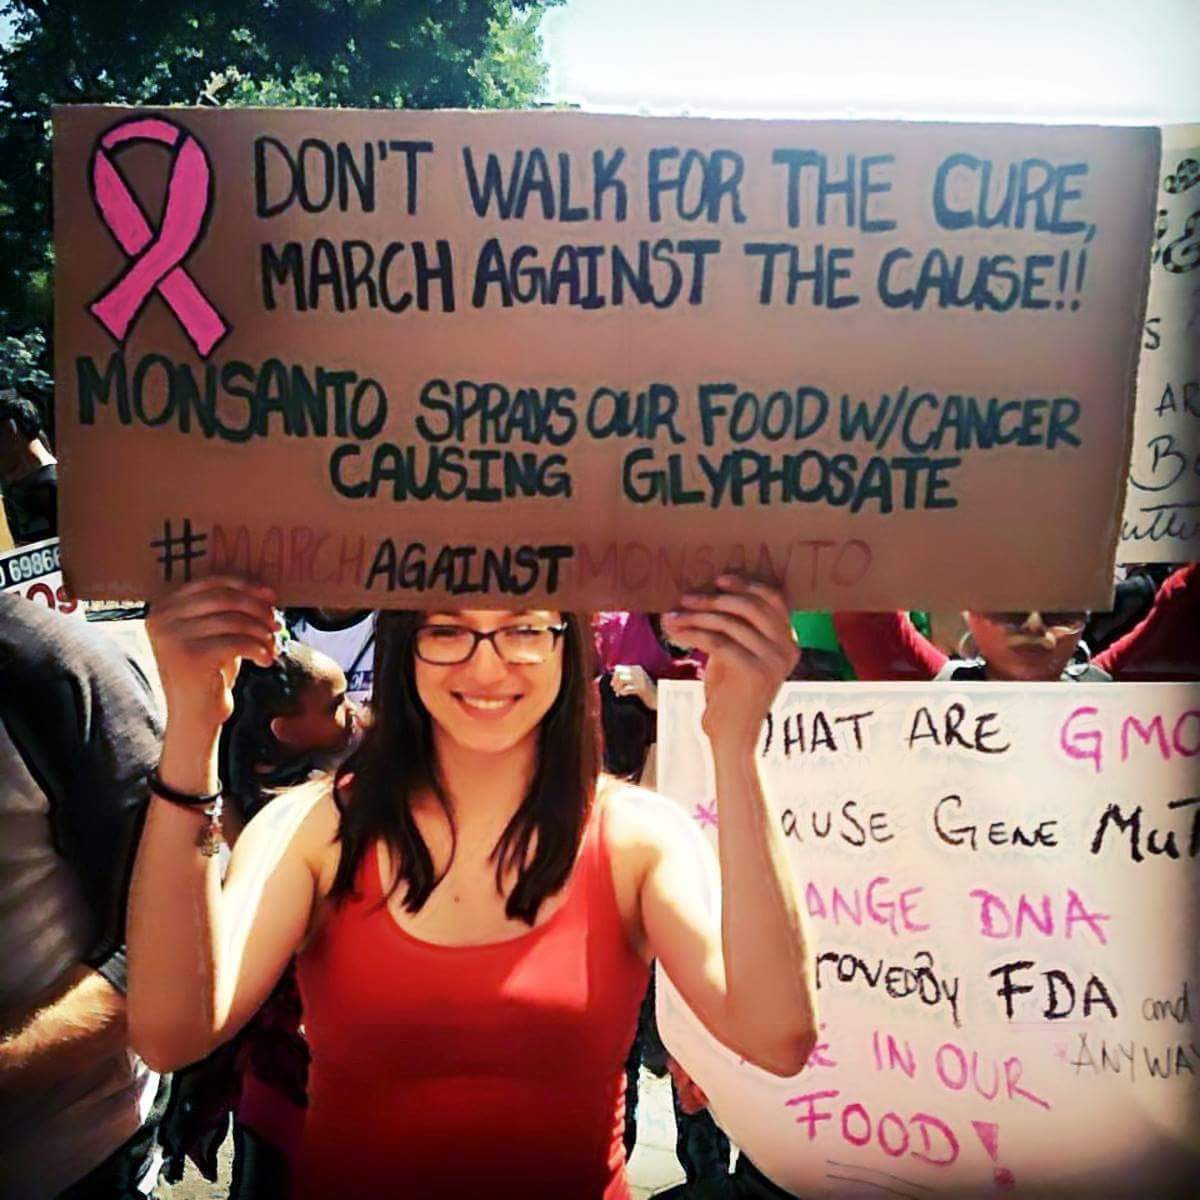 March Against Monsanto [Watch FREE] The Truth About Cancer Live Starts TODAY! 8fbb9d0a4bb30f6f29636f1b3079b4f8a4ad61e97d025967bc0a43a0baa948b5b692448e849b8a876622f5f3fb4e7eba6d91f04d29402672b6fc9806bb1fc408